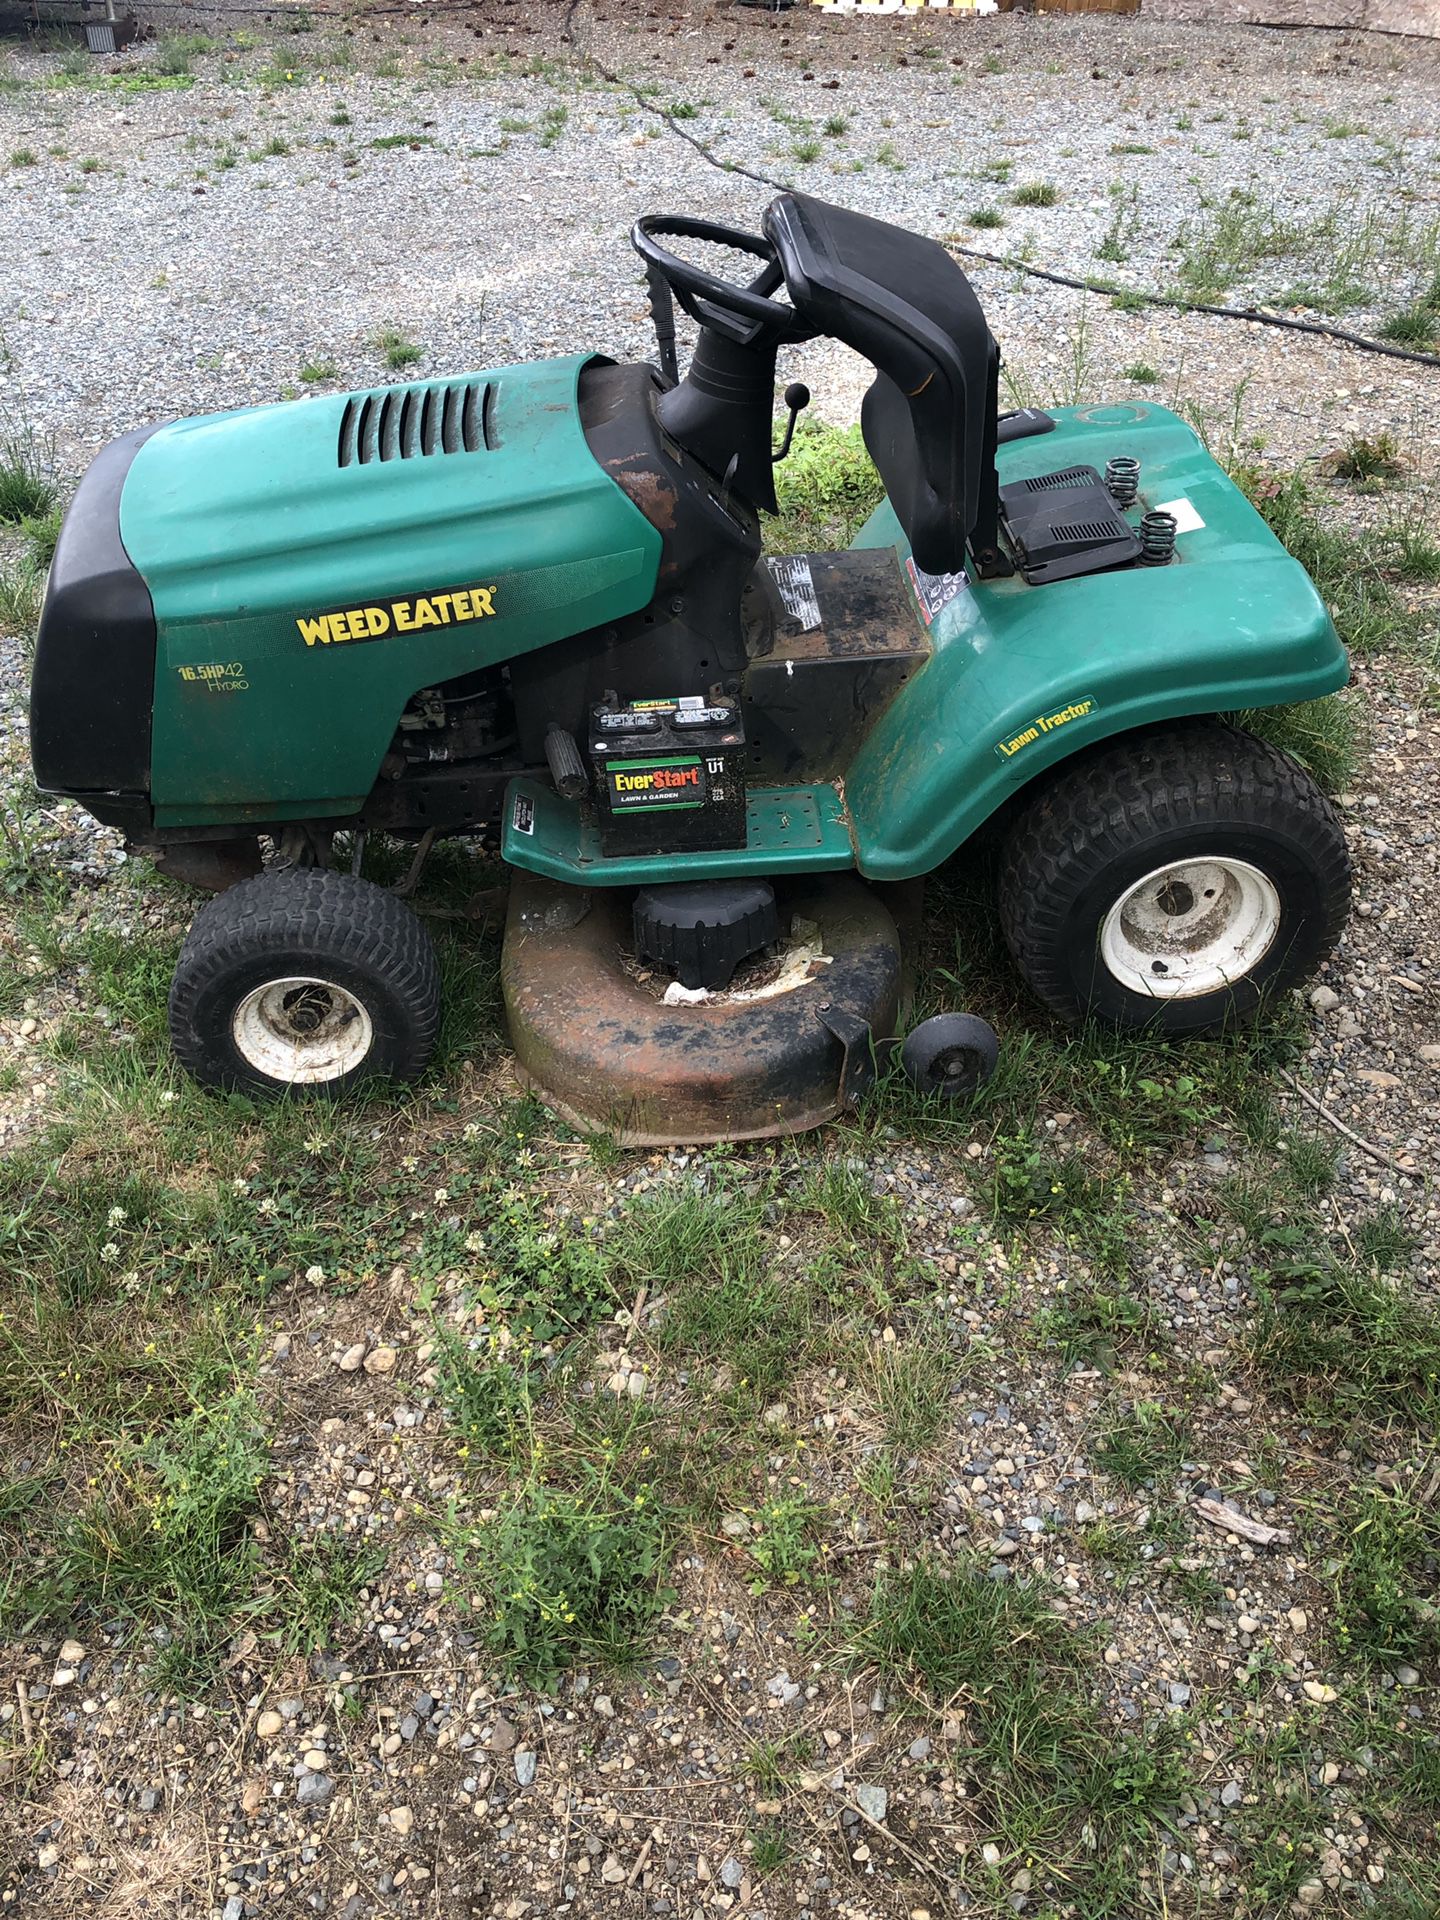 Weed eater lawn mower tractor